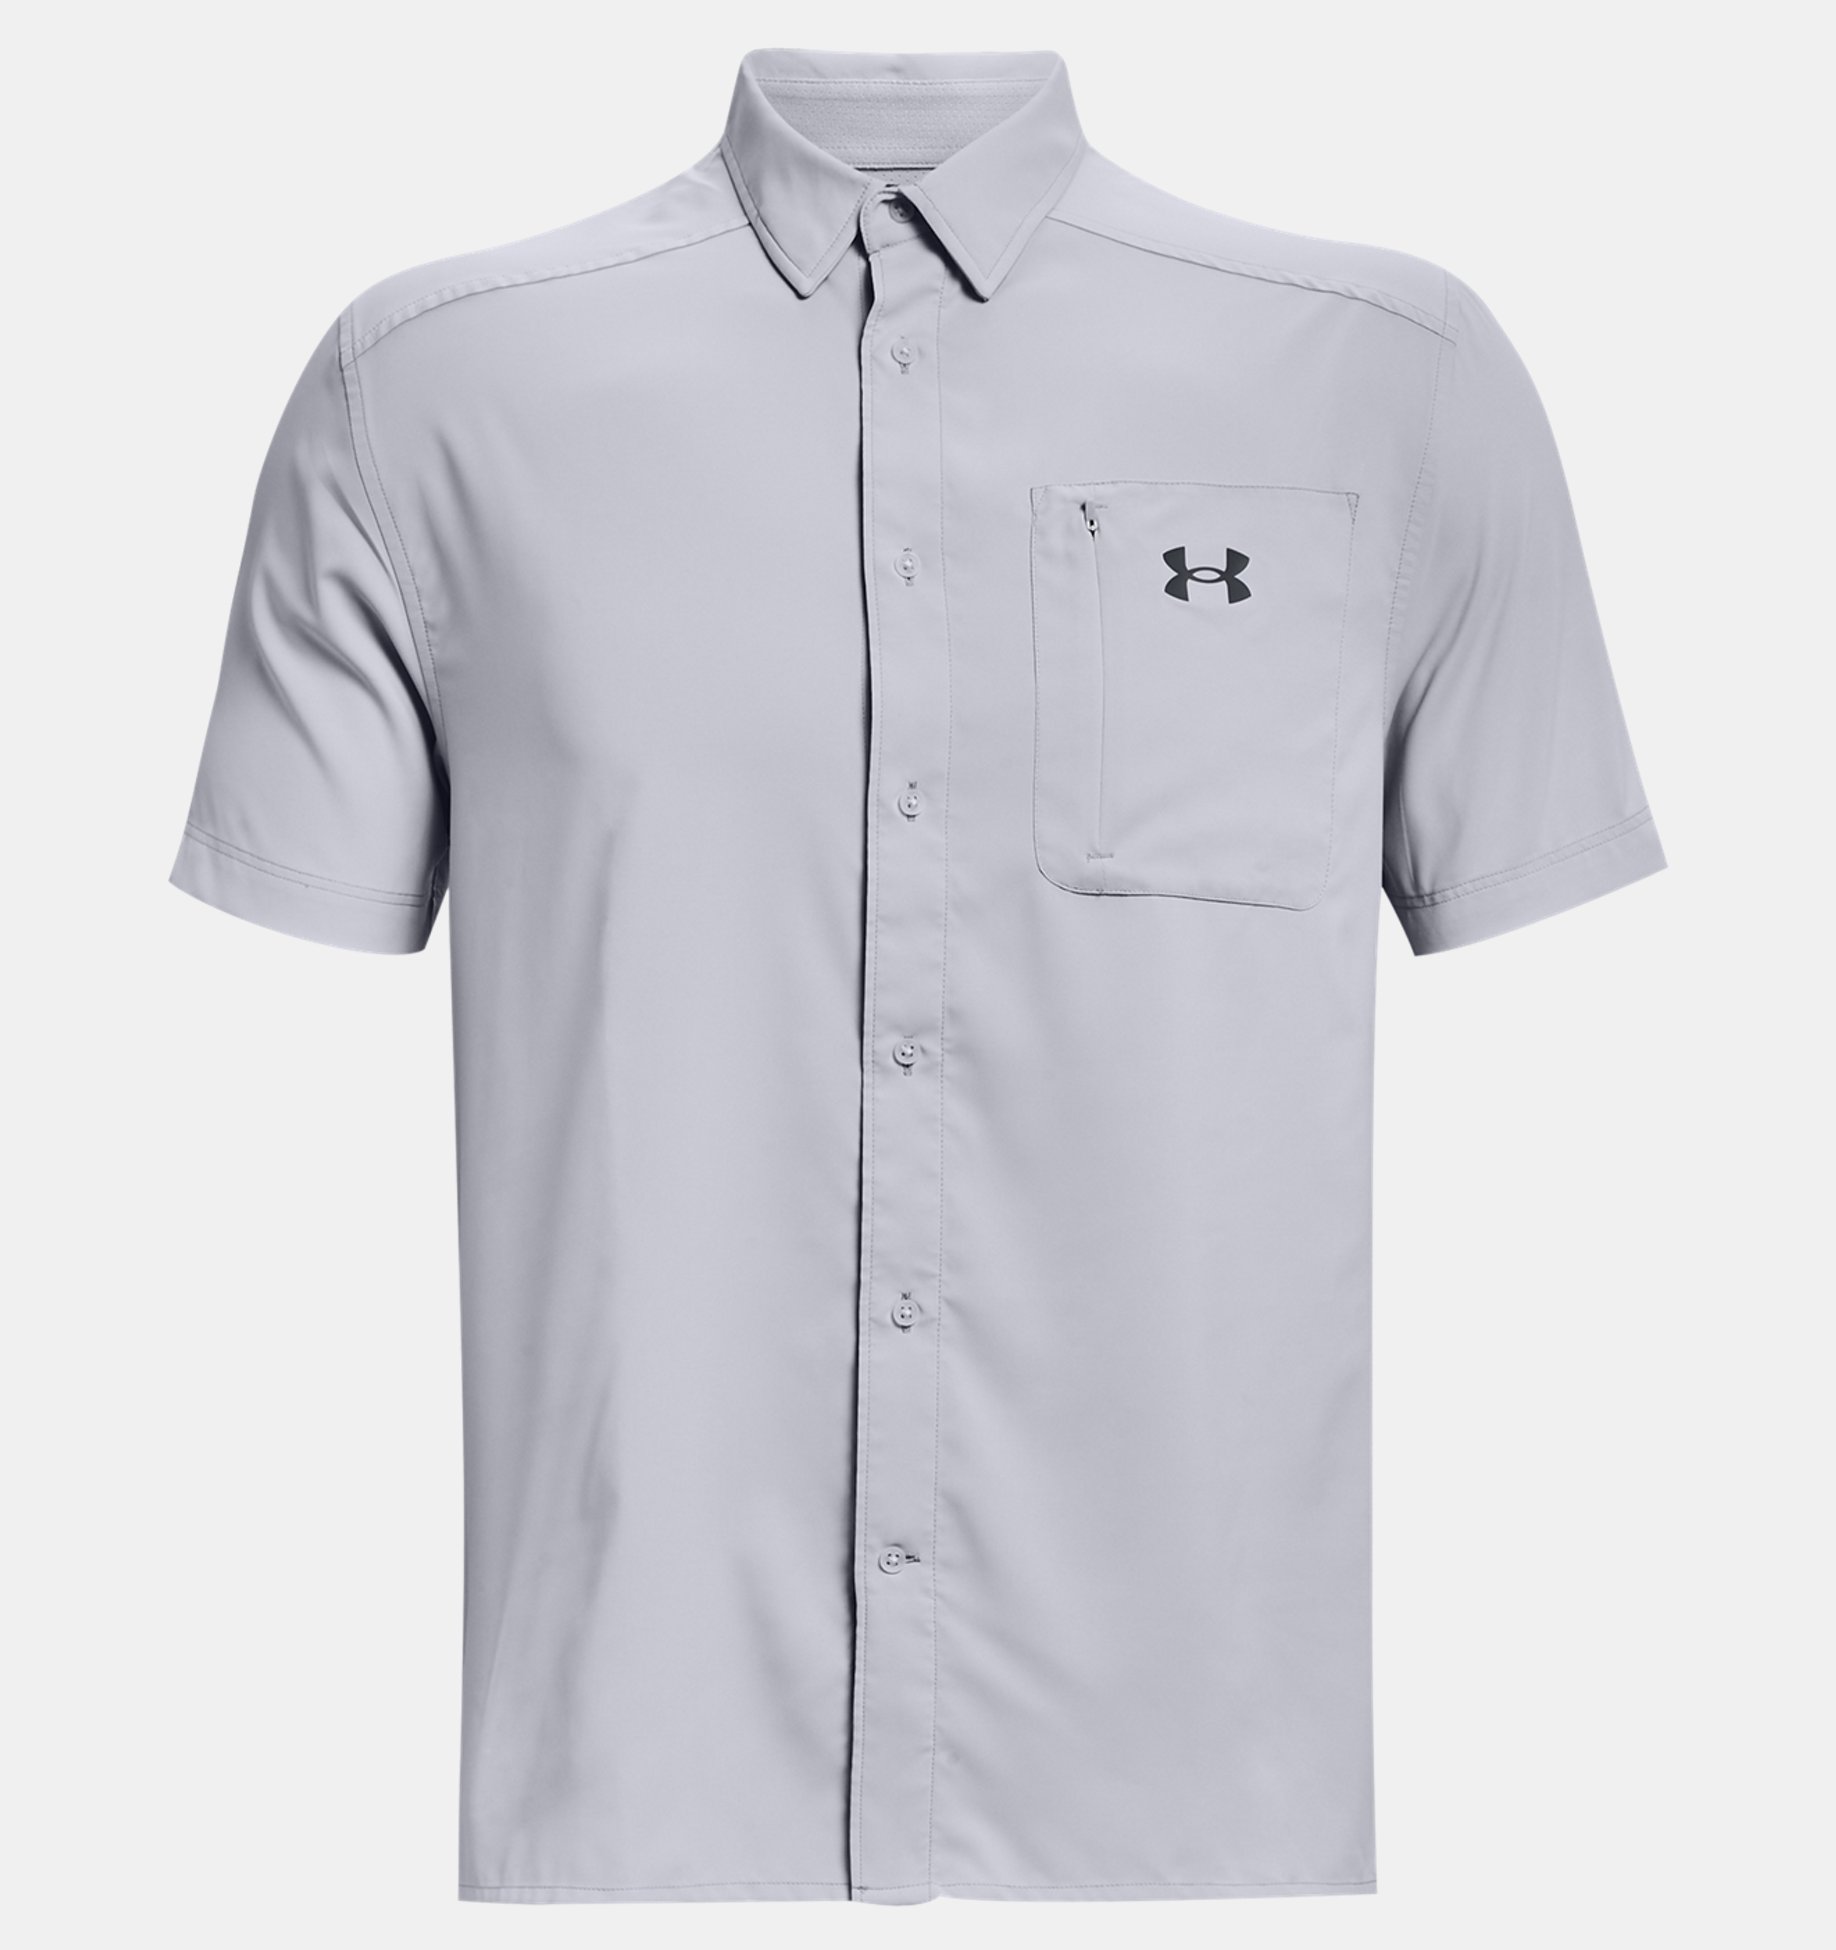 Under Armour Performance 2.0 Chemise Homme